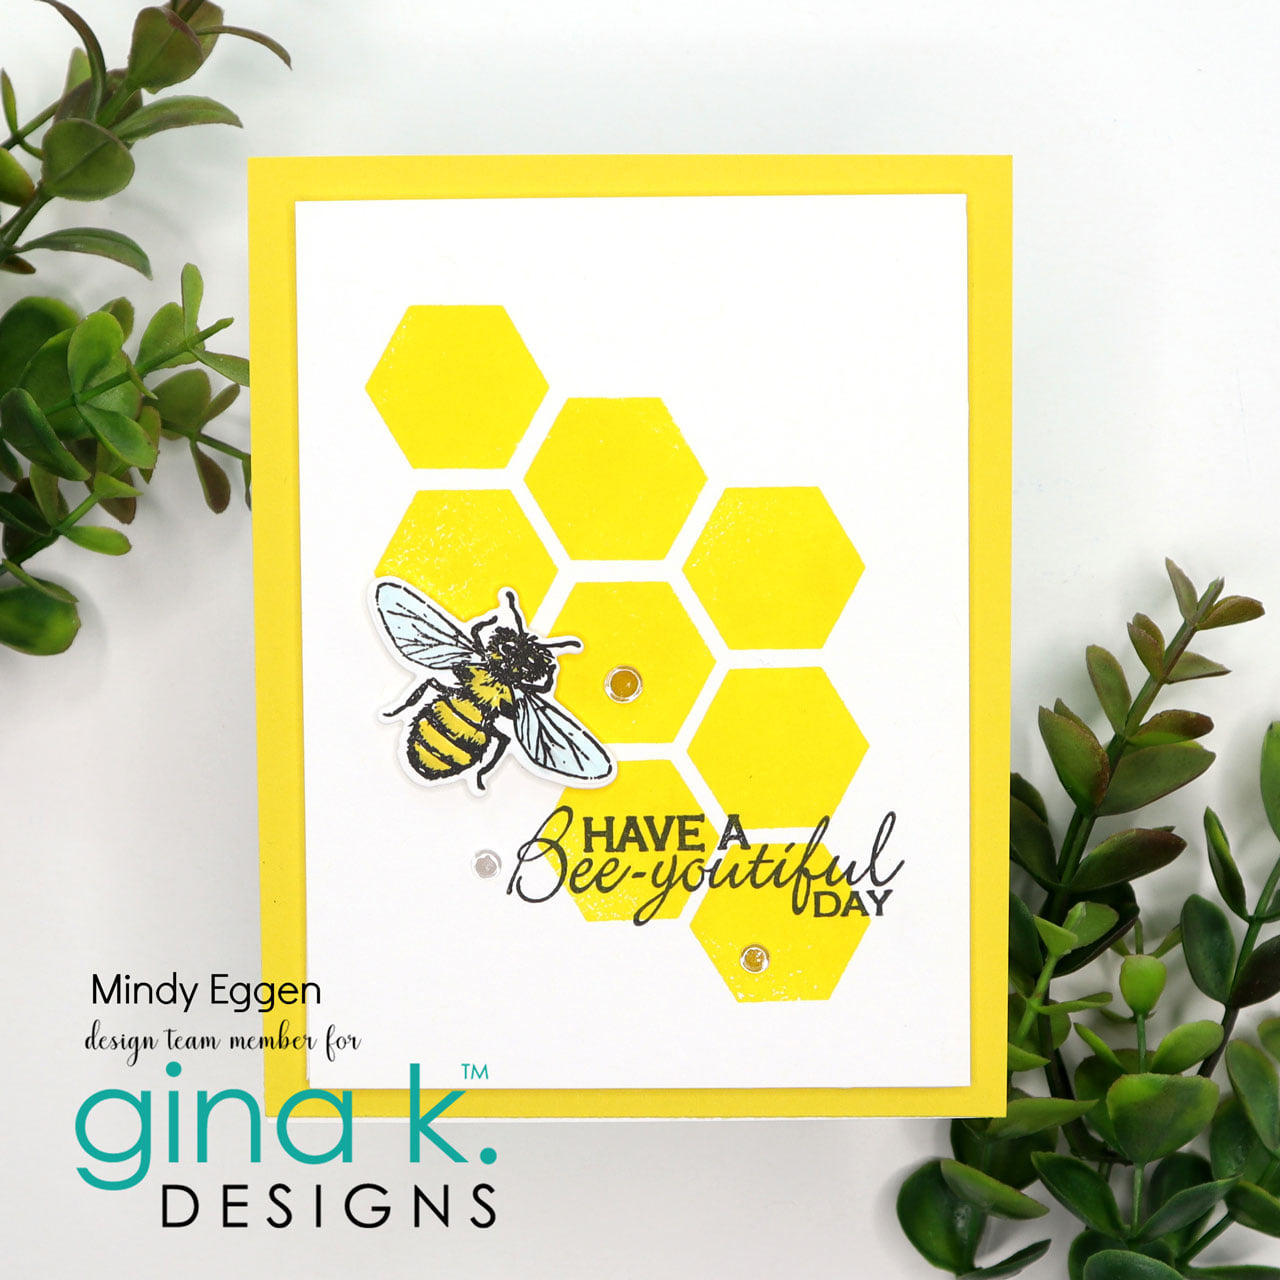 Gina K Designs BEAUTIFUL BEES Clear Stamps 6903